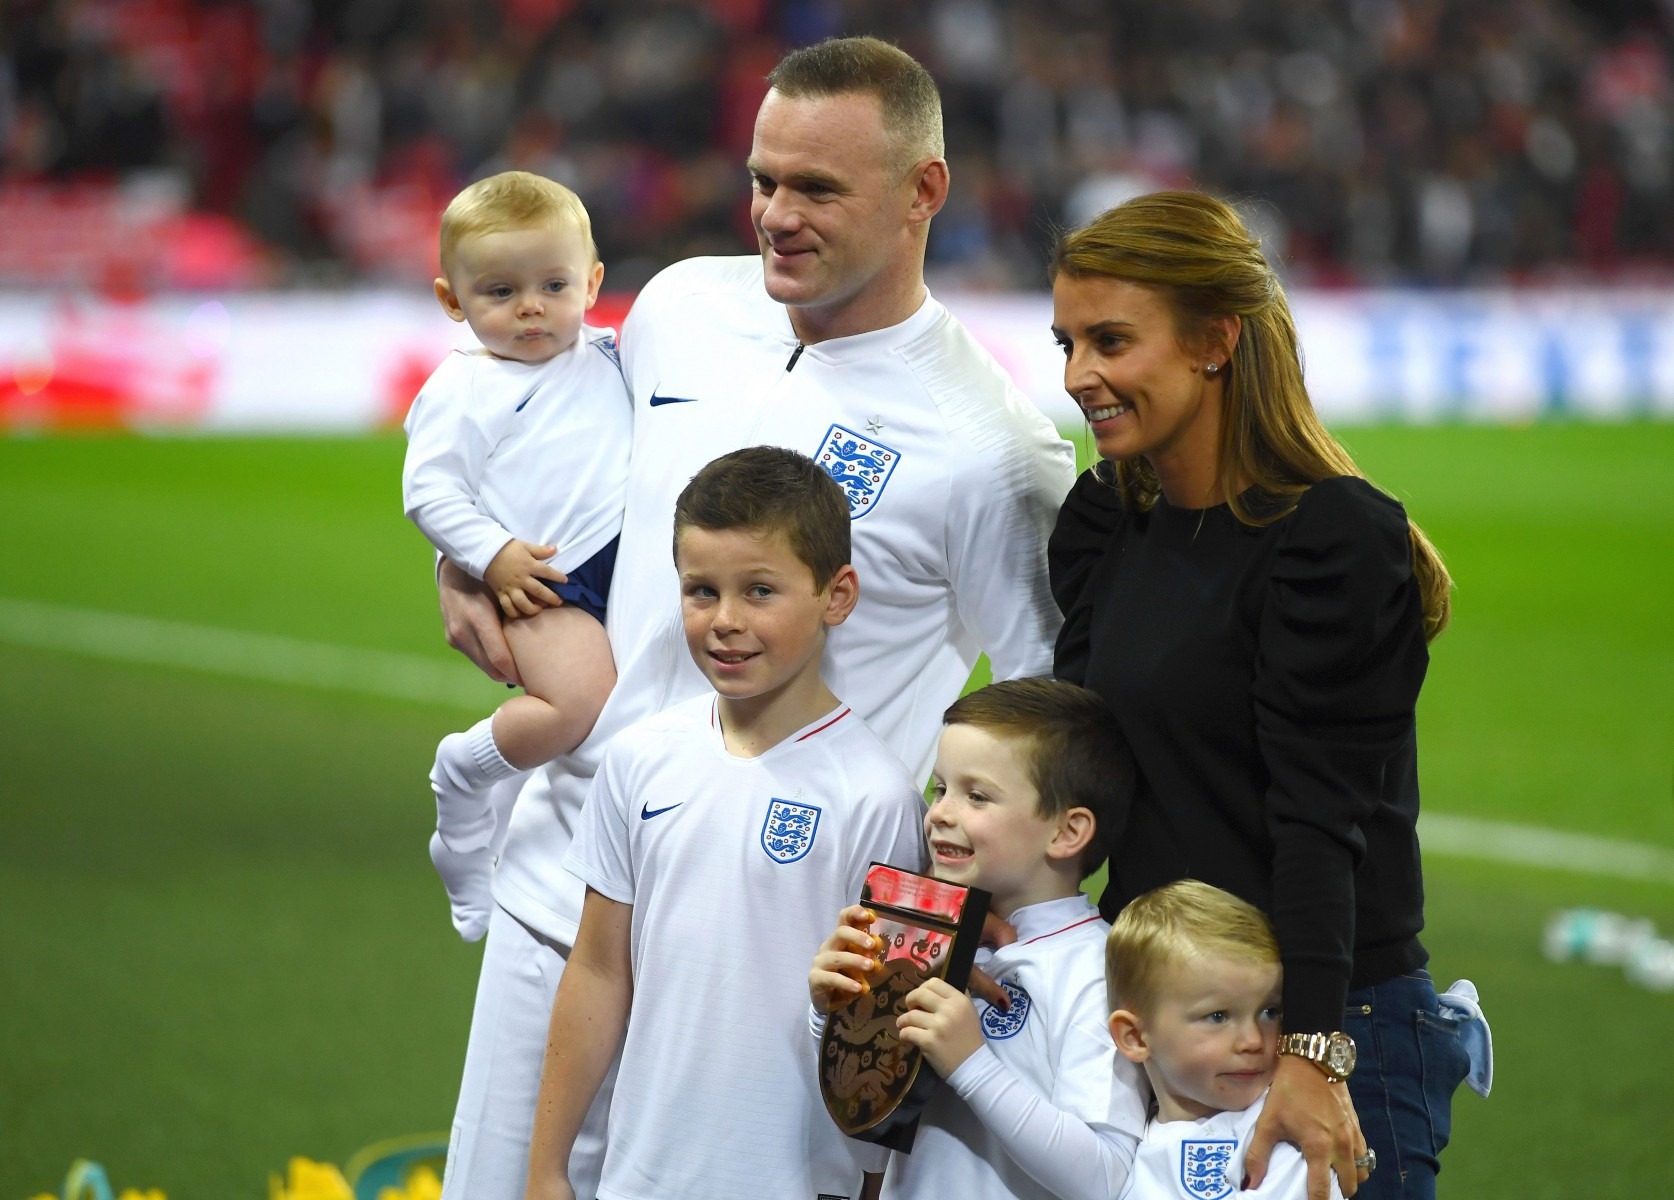 , Man Utd legend Wayne Rooneys son Kai, 9, to be offered place in Man Citys academy when family returns to England